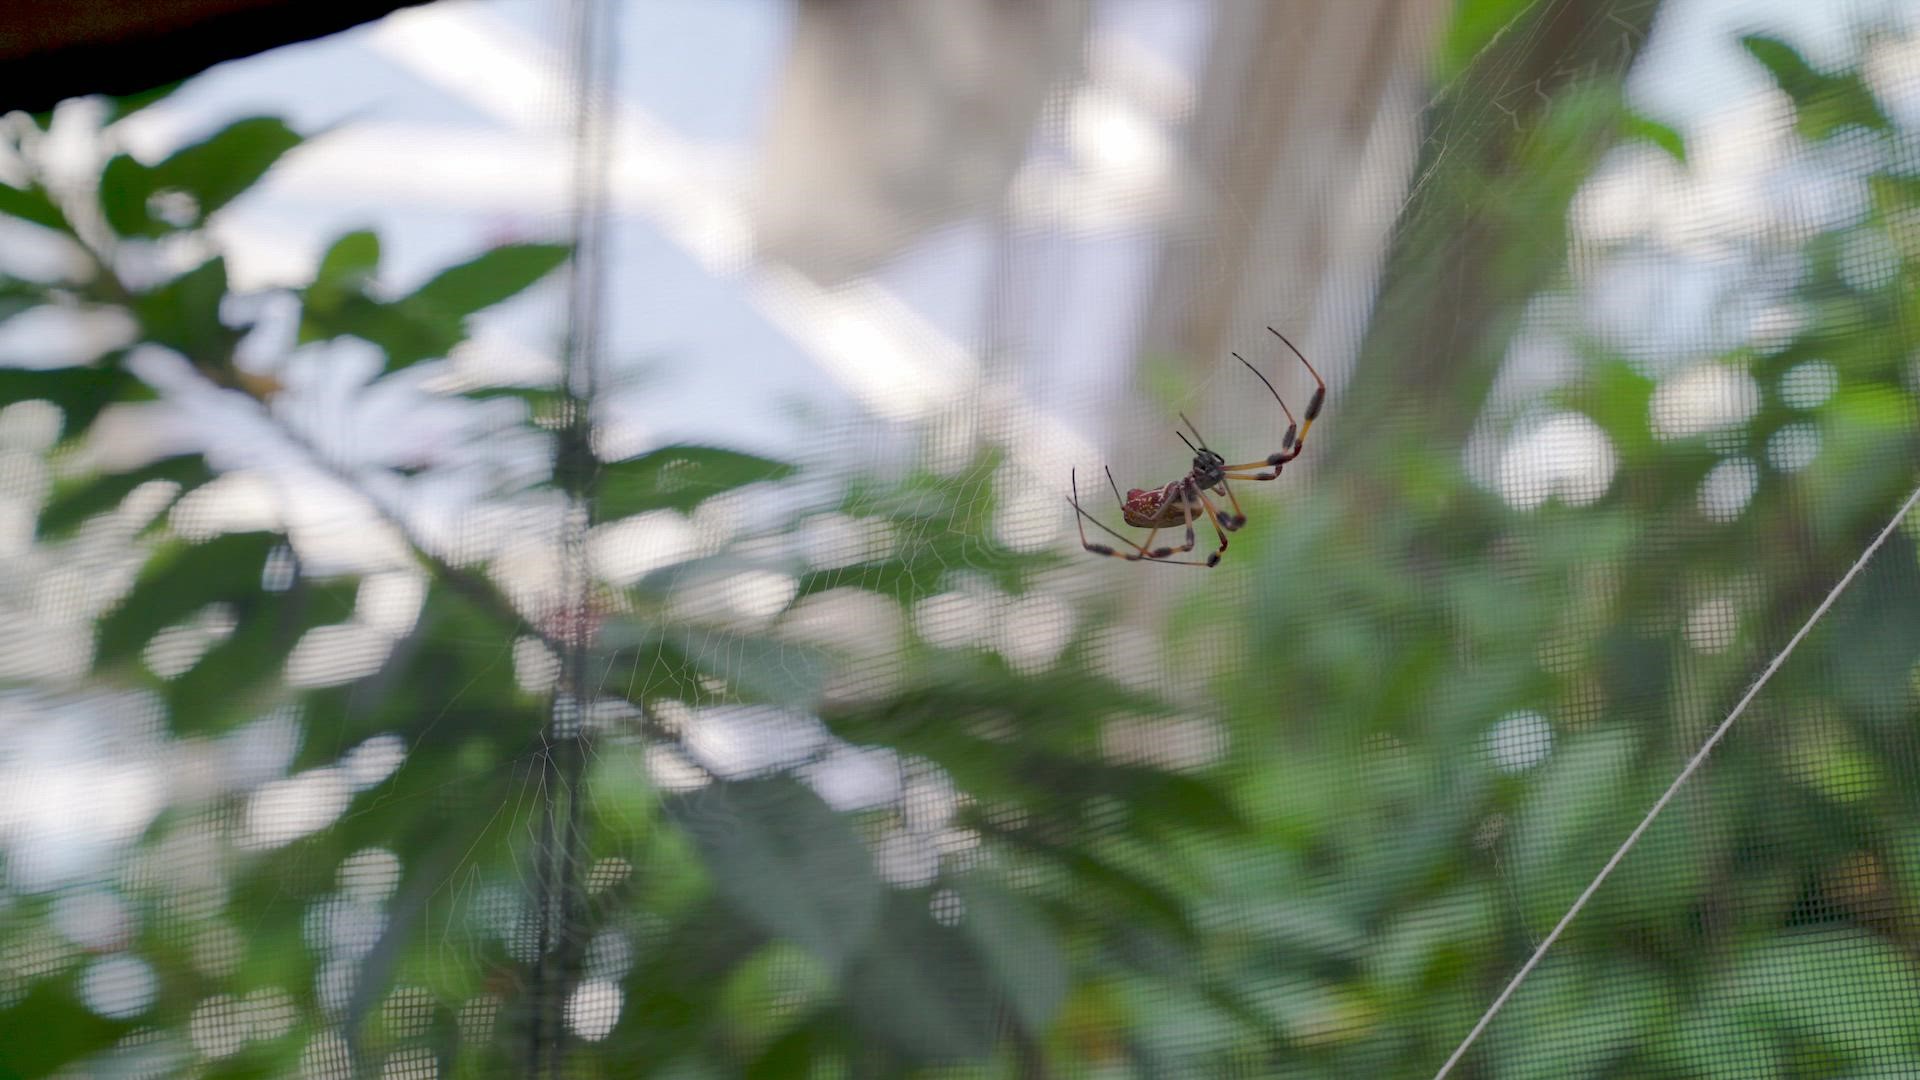 Butterfly Pavilion in Westminster, Colorado has more than 50 orb-weaving spiders.